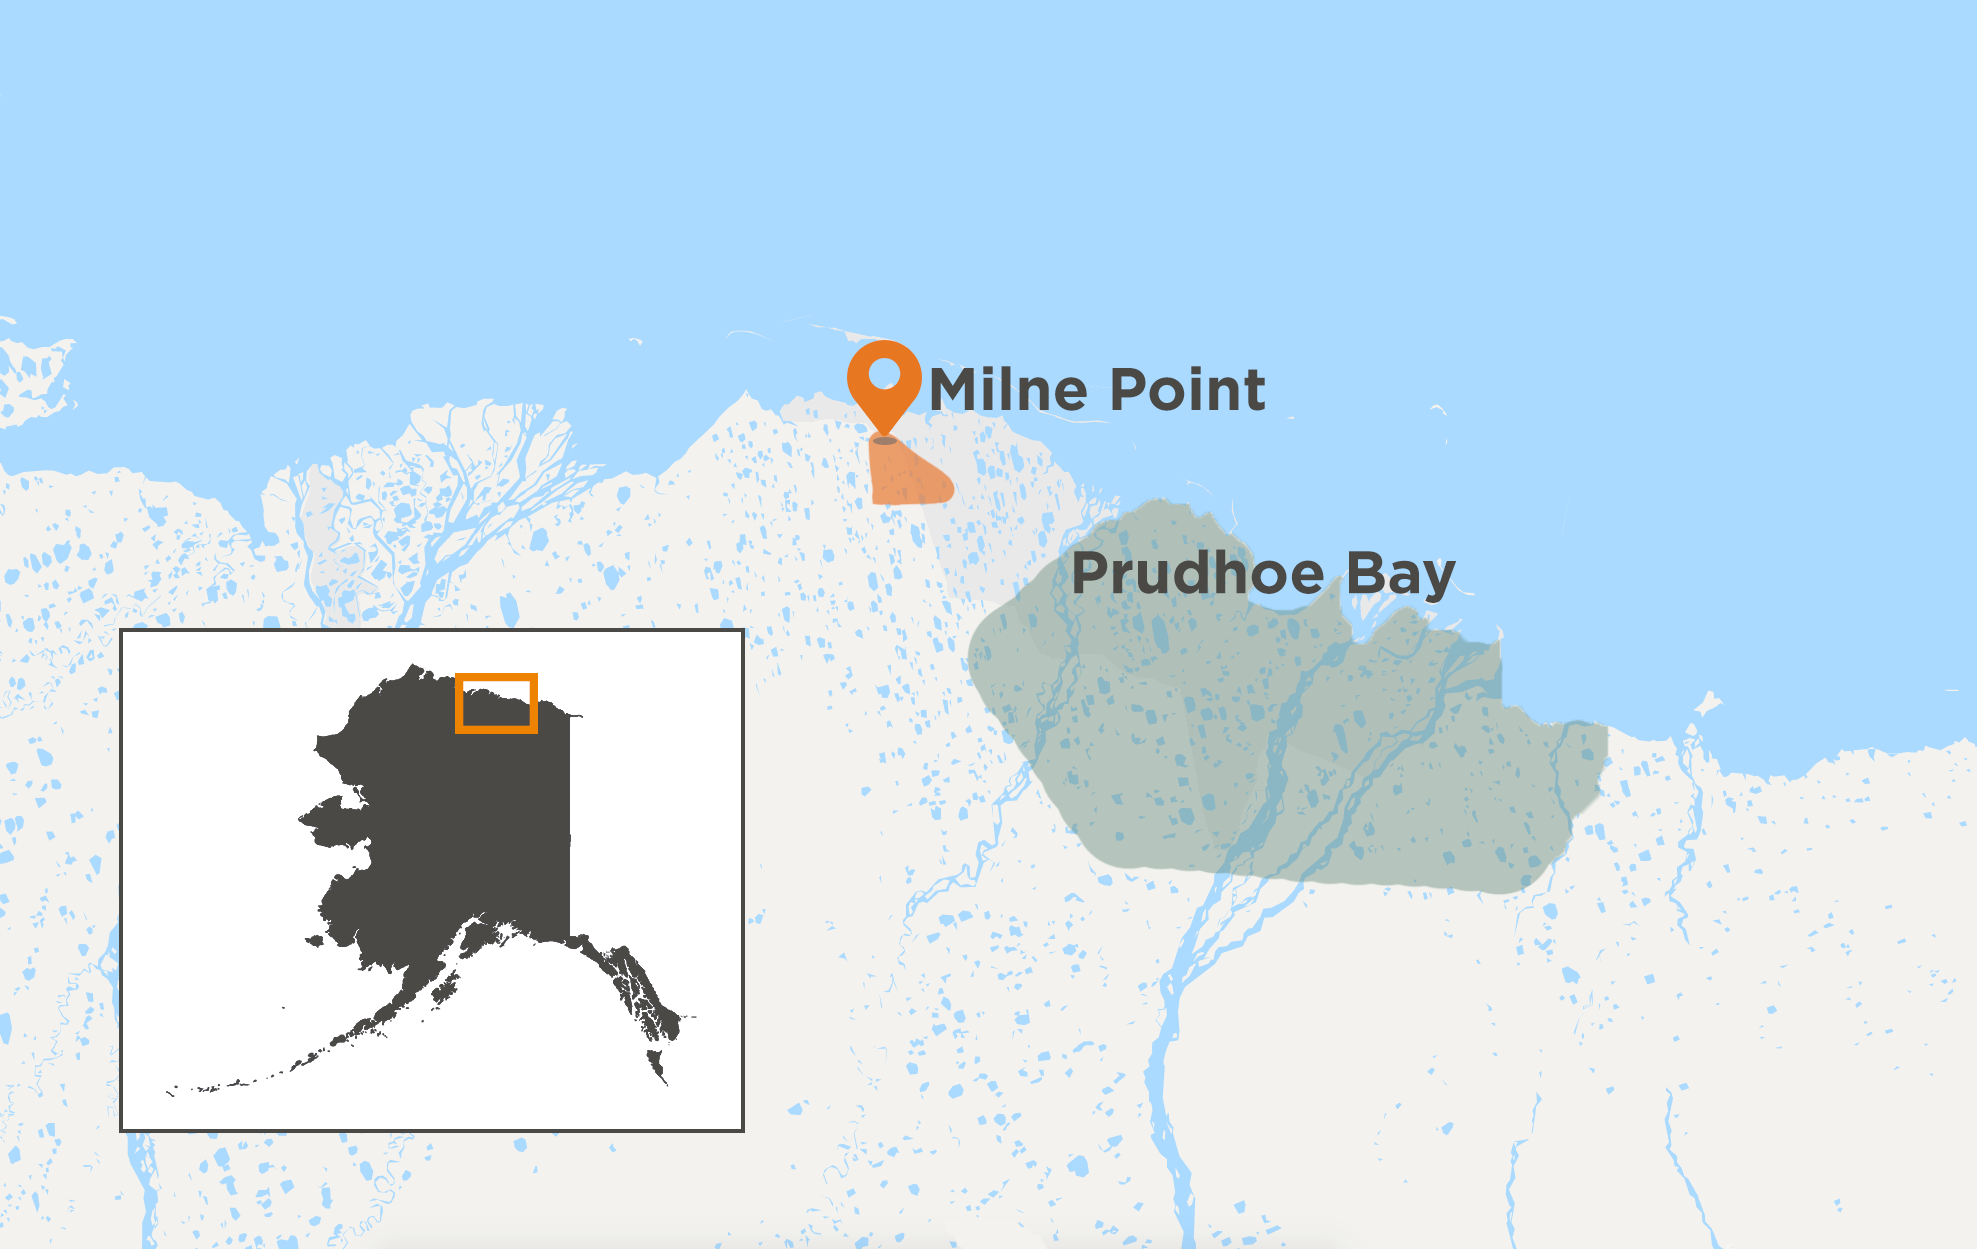 a map shows prudhoe bay and milne point in alaska